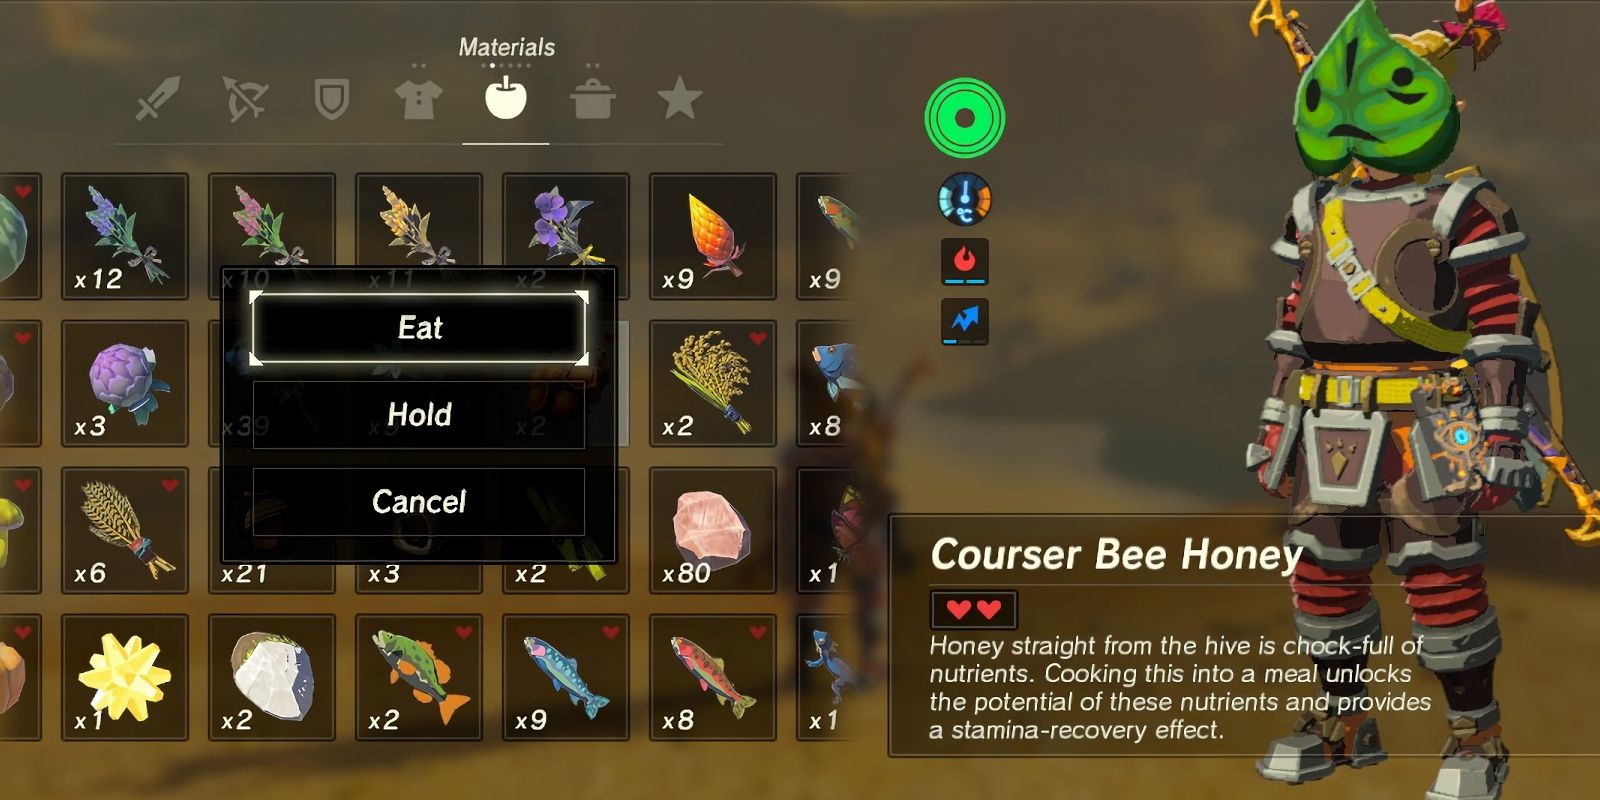 A screenshot shows the cluttered ingredient menu in Breath of the Wild, featuring prominently Courser Bee Honey. Link stands to the side, wearing a korok mask.